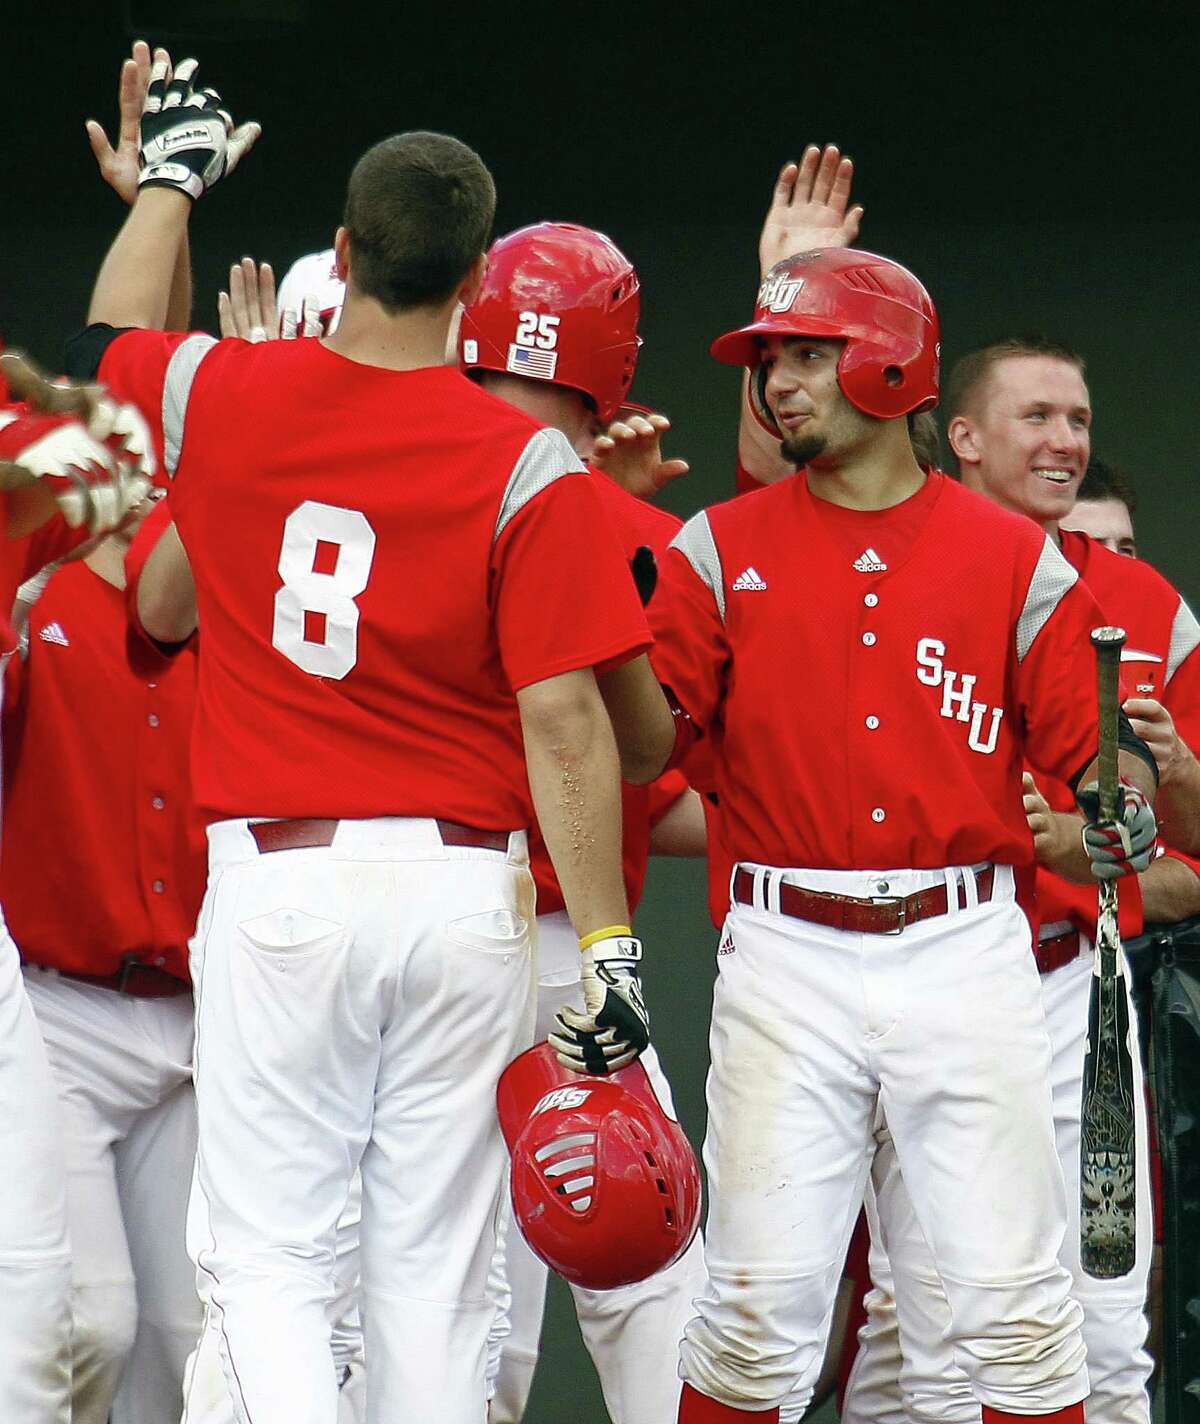 Sacred Heart University baseball players during an NCAA college baseball tournament regional game against UNC Wilmington in Raleigh, N.C., June 2, 2012.